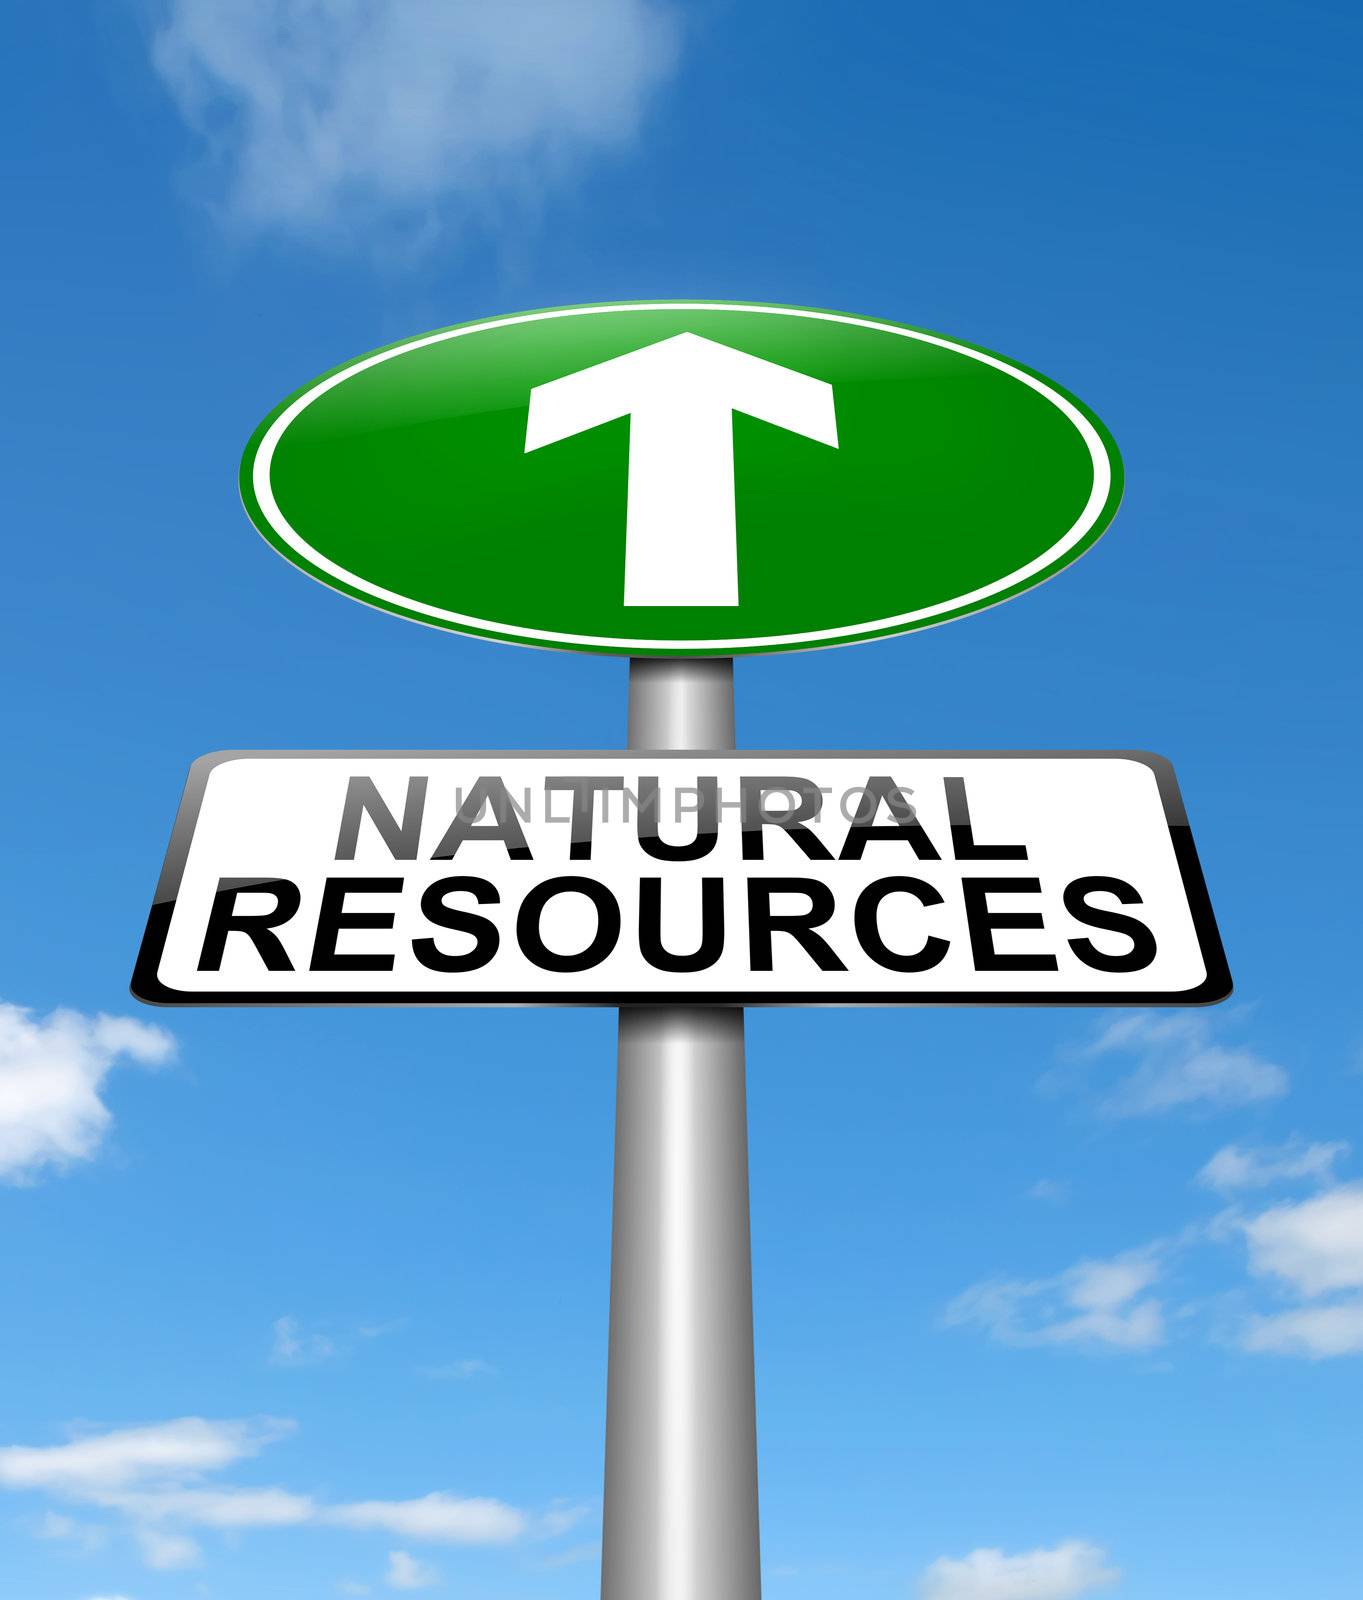 Illustration depicting a sign with a natural resources concept.